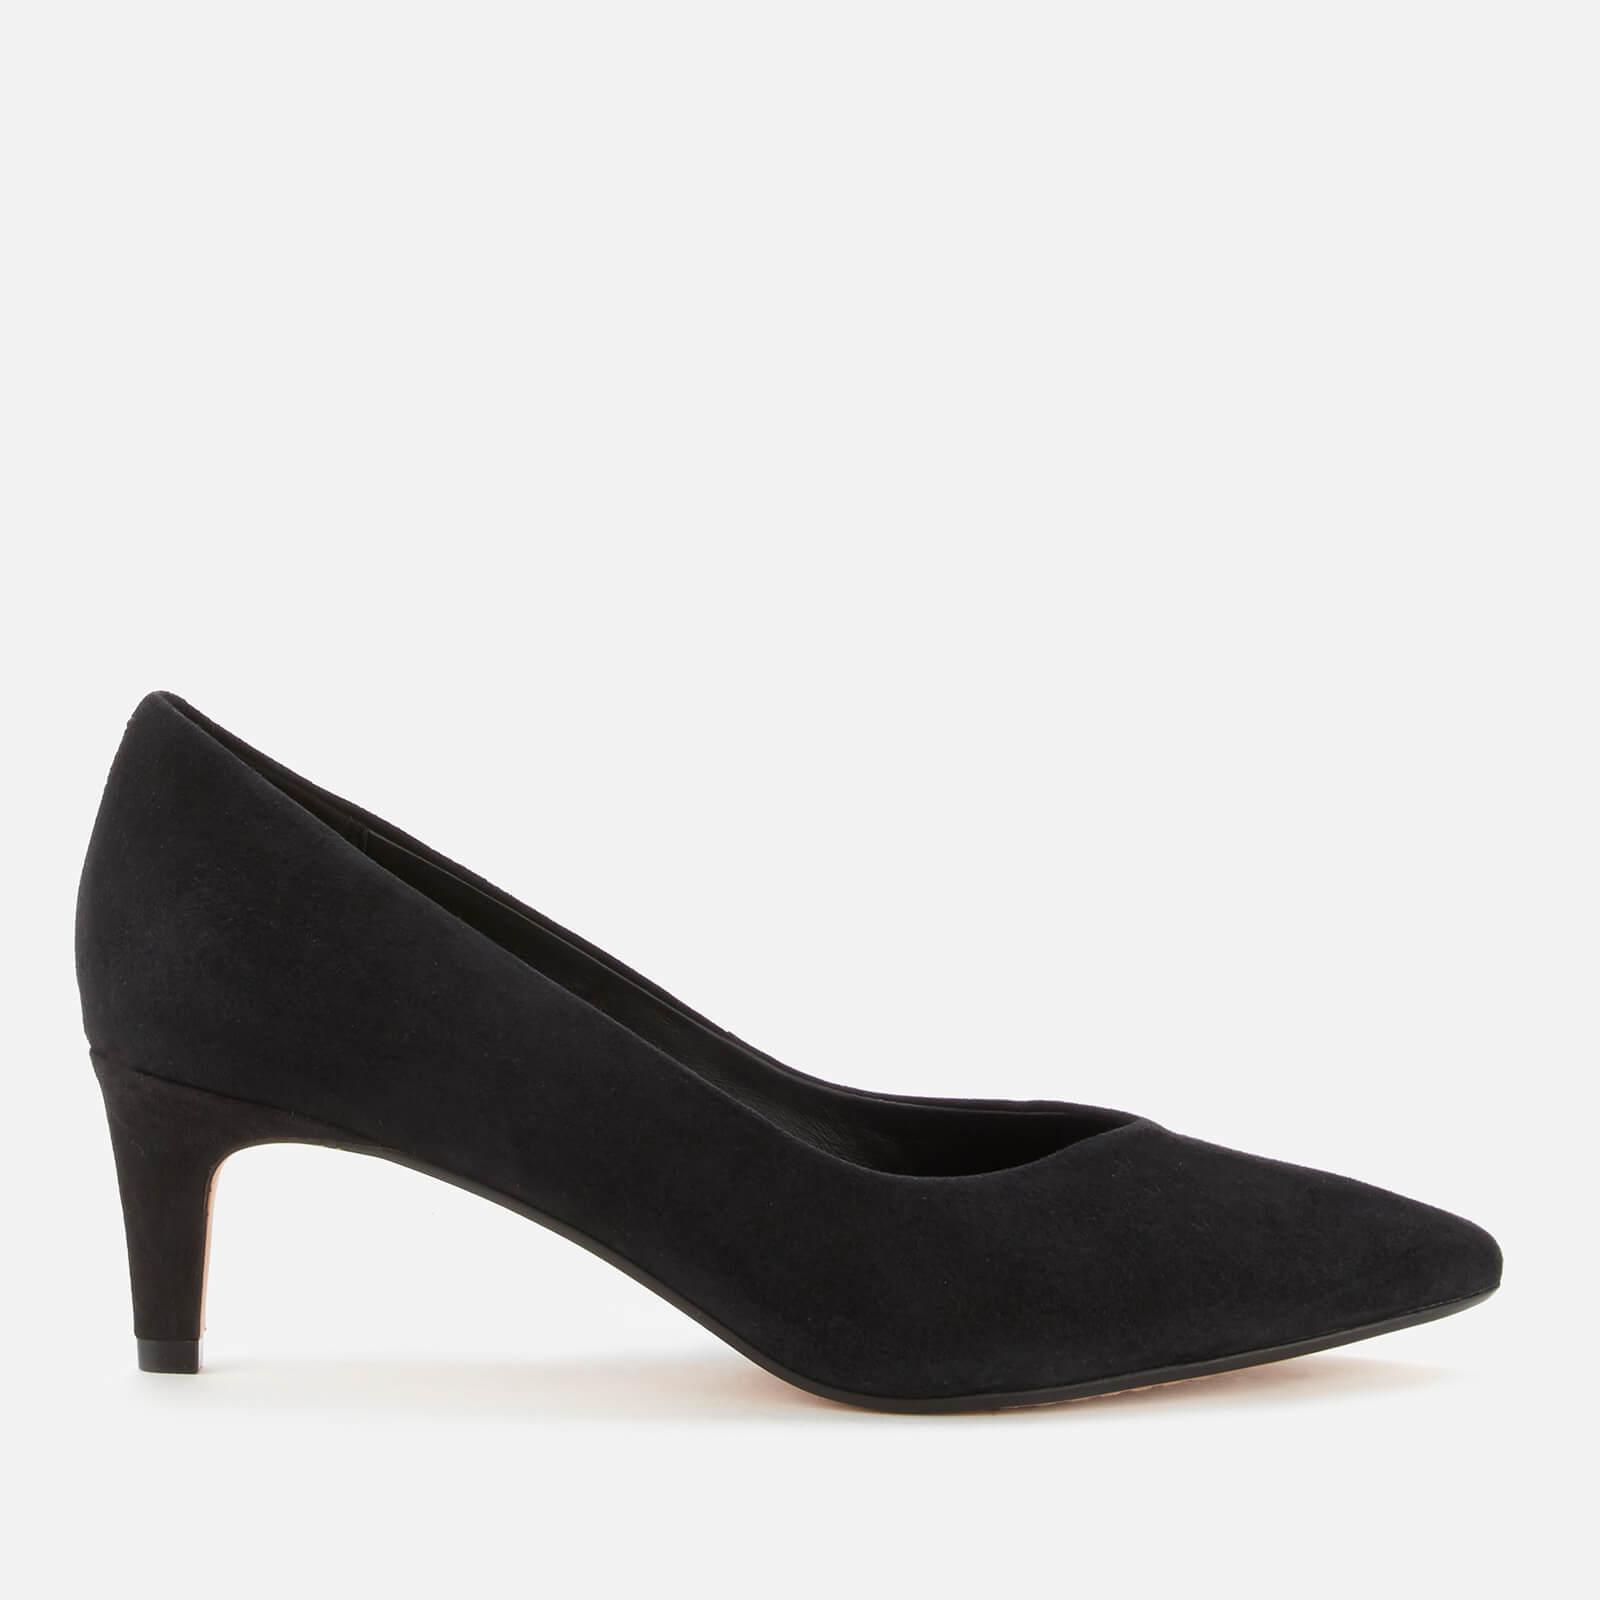 Clarks Laina55 Court2 Suede Court Shoes in Black - Lyst